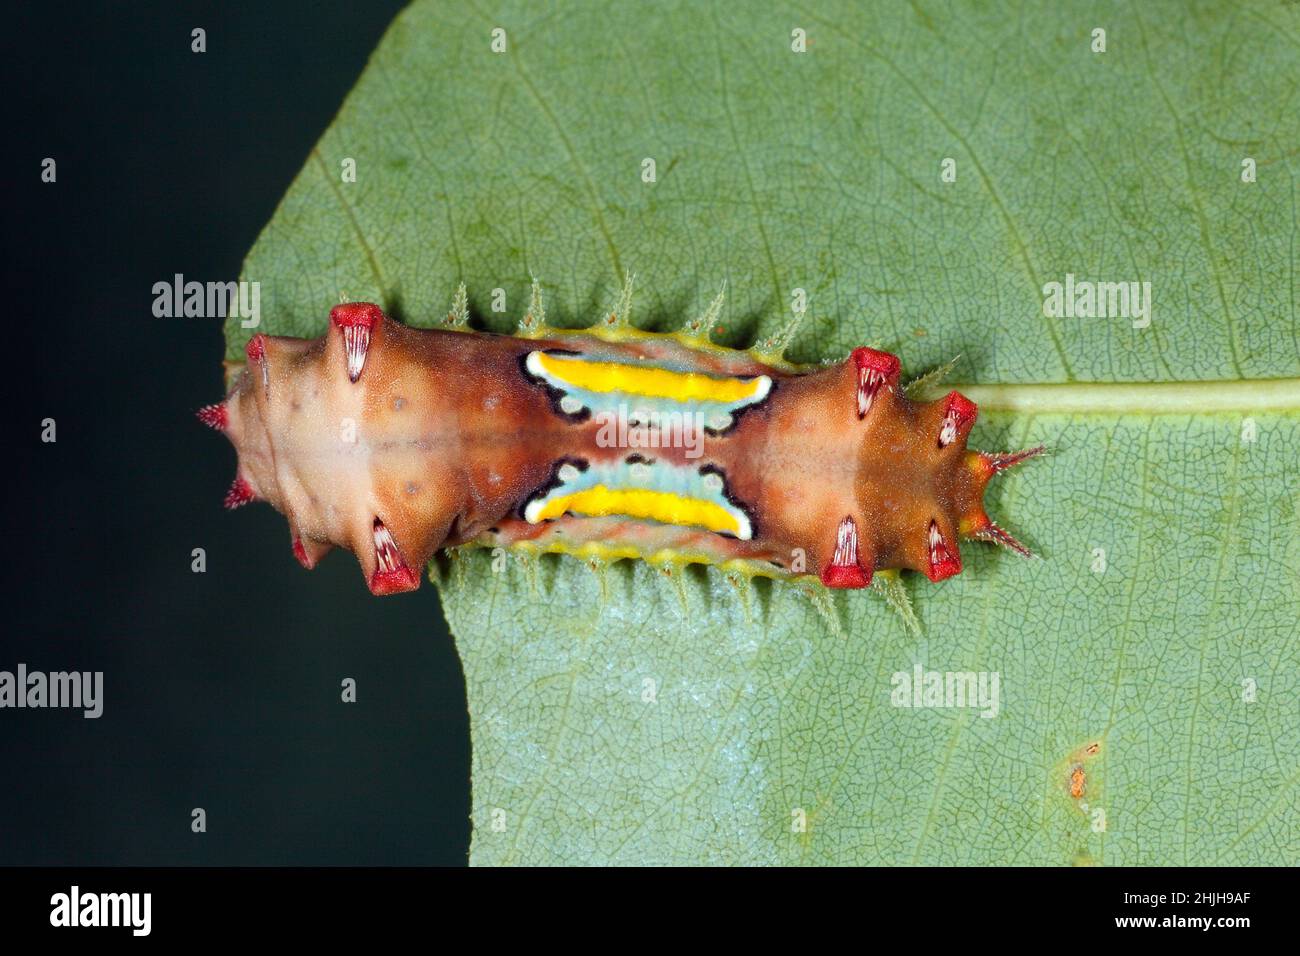 Mottled Cup Moth caterpillar, Doratifera vulnerans. These caterpillars have stinging spines that contain toxins, and they evert their spines when dist Stock Photo